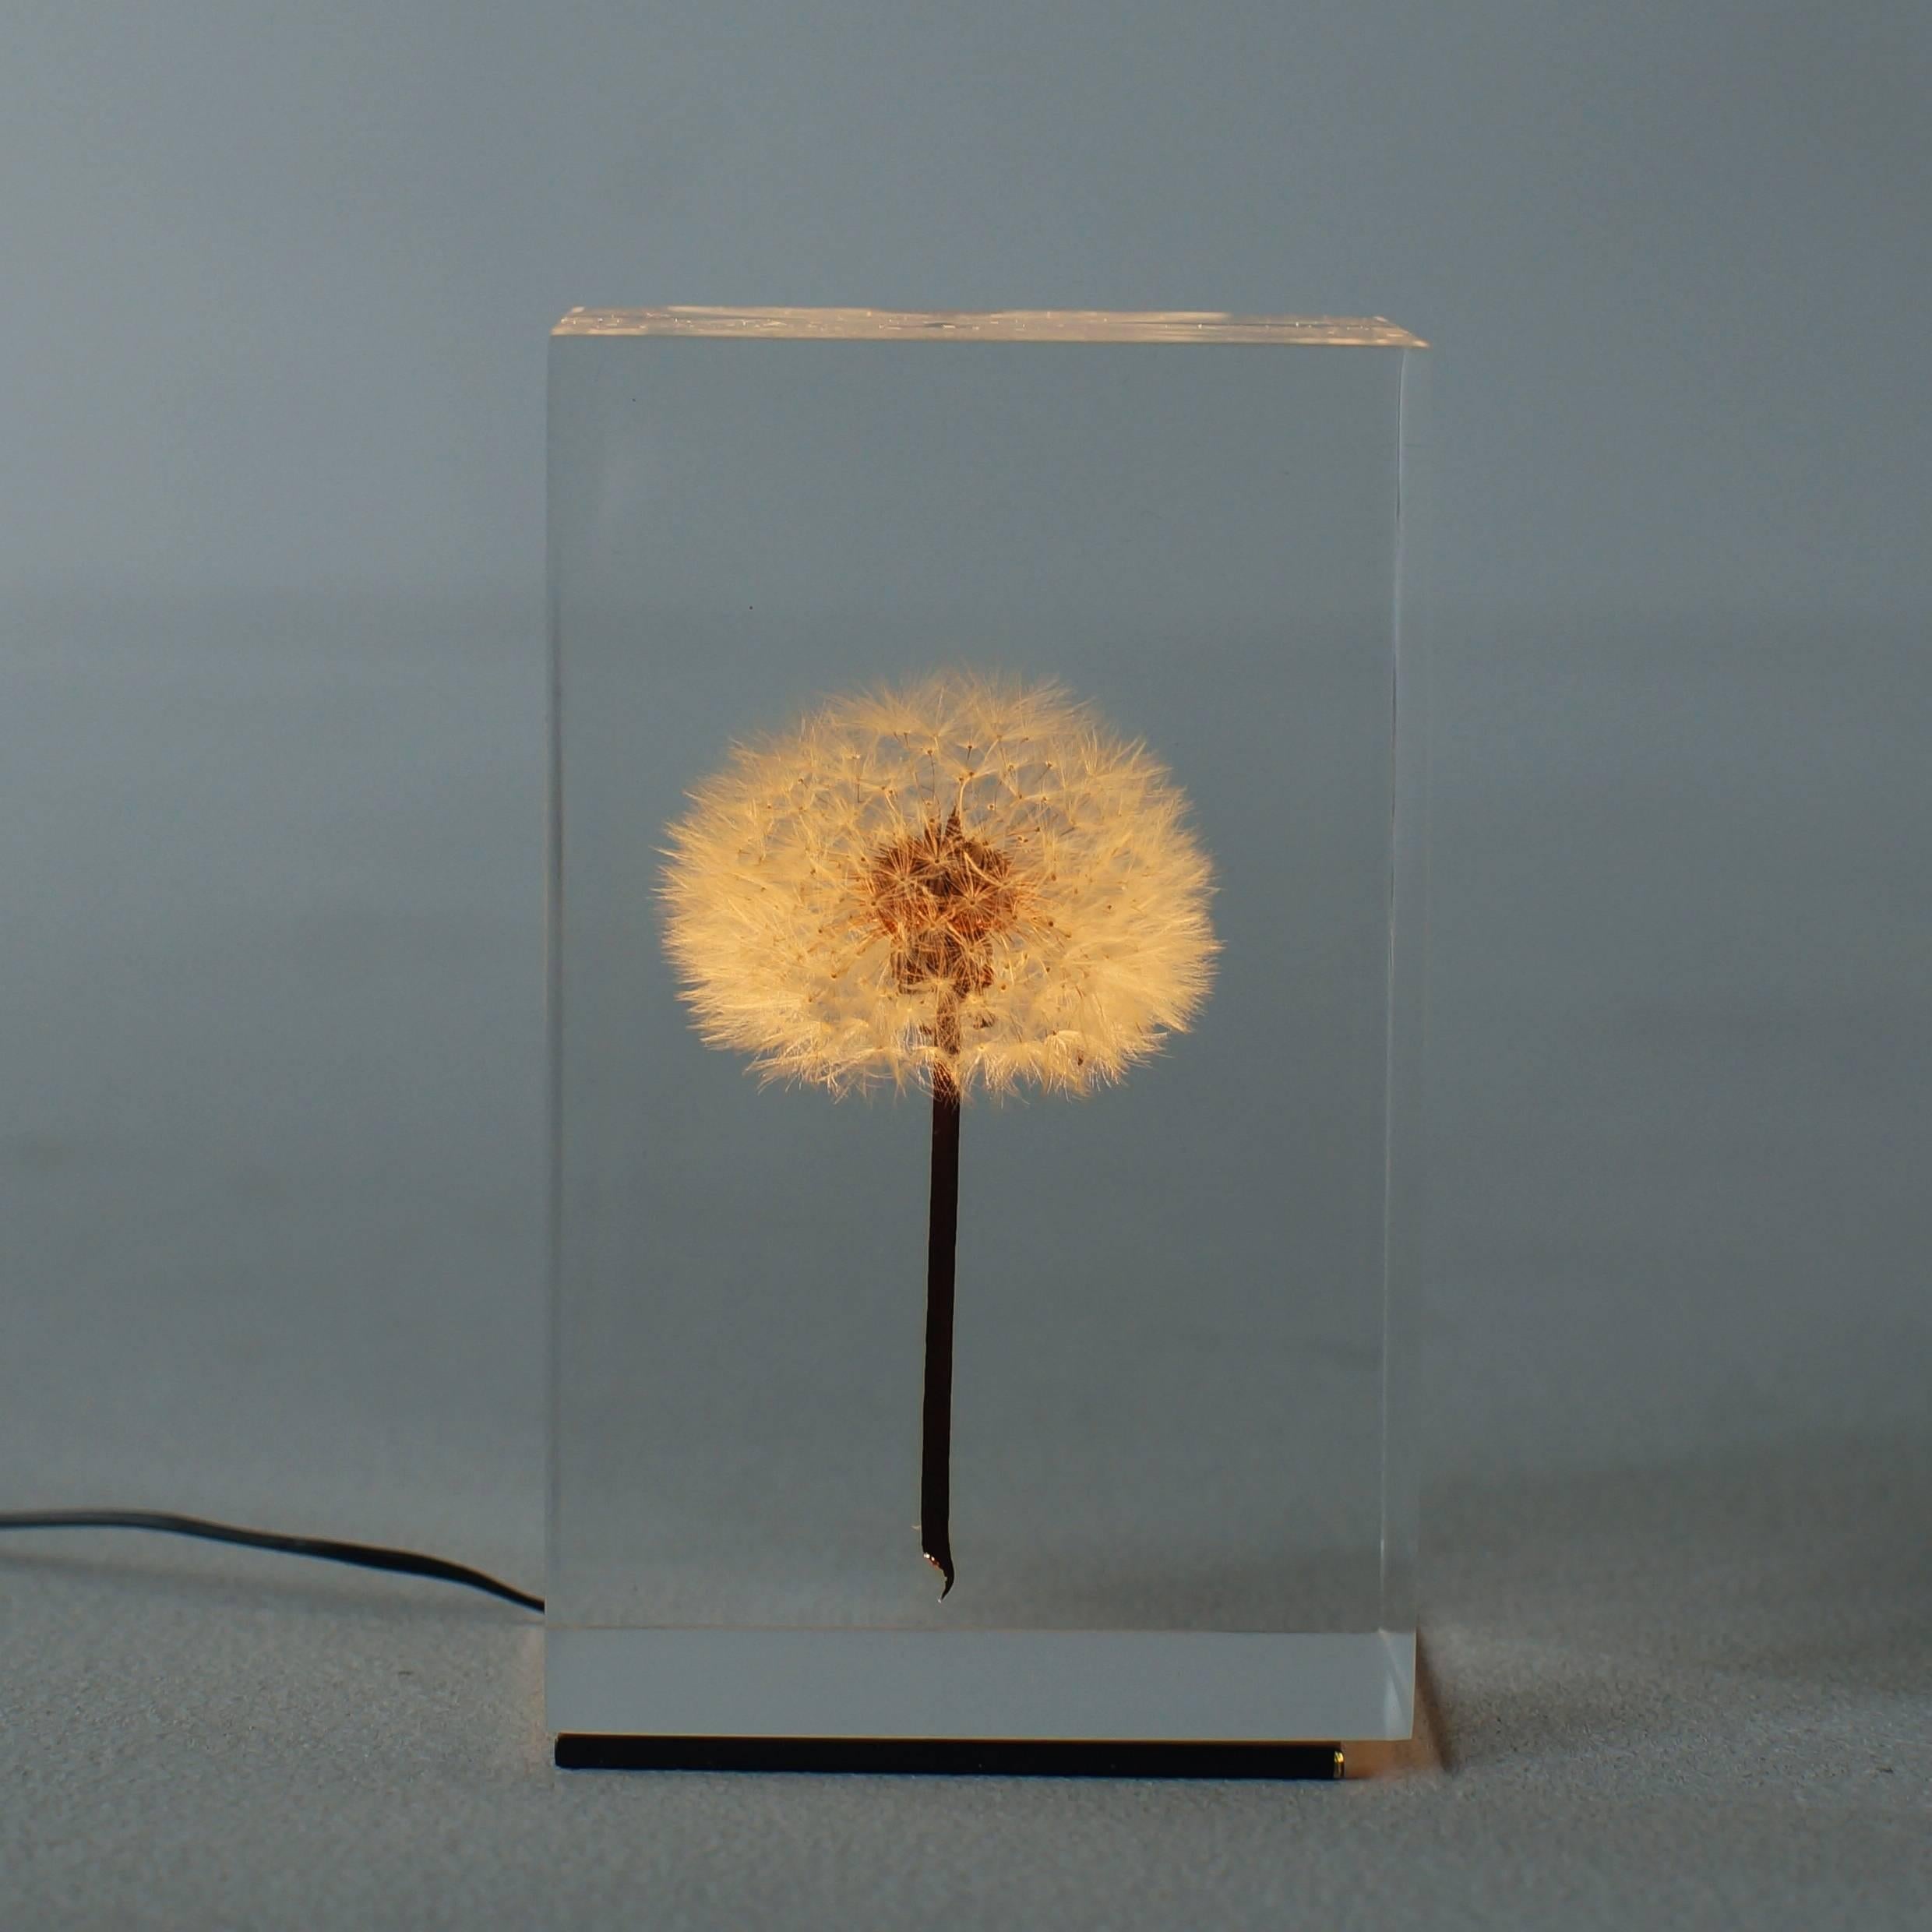 Oled Tampopo is light model of Tampopo acrylic object that real dandelion sealed in. Artist is Takao Inoue who is based in Tokyo. Oled Tampopo illuminates randomly stronger or weaker like an candle. We set small computer chip in electric adapter to